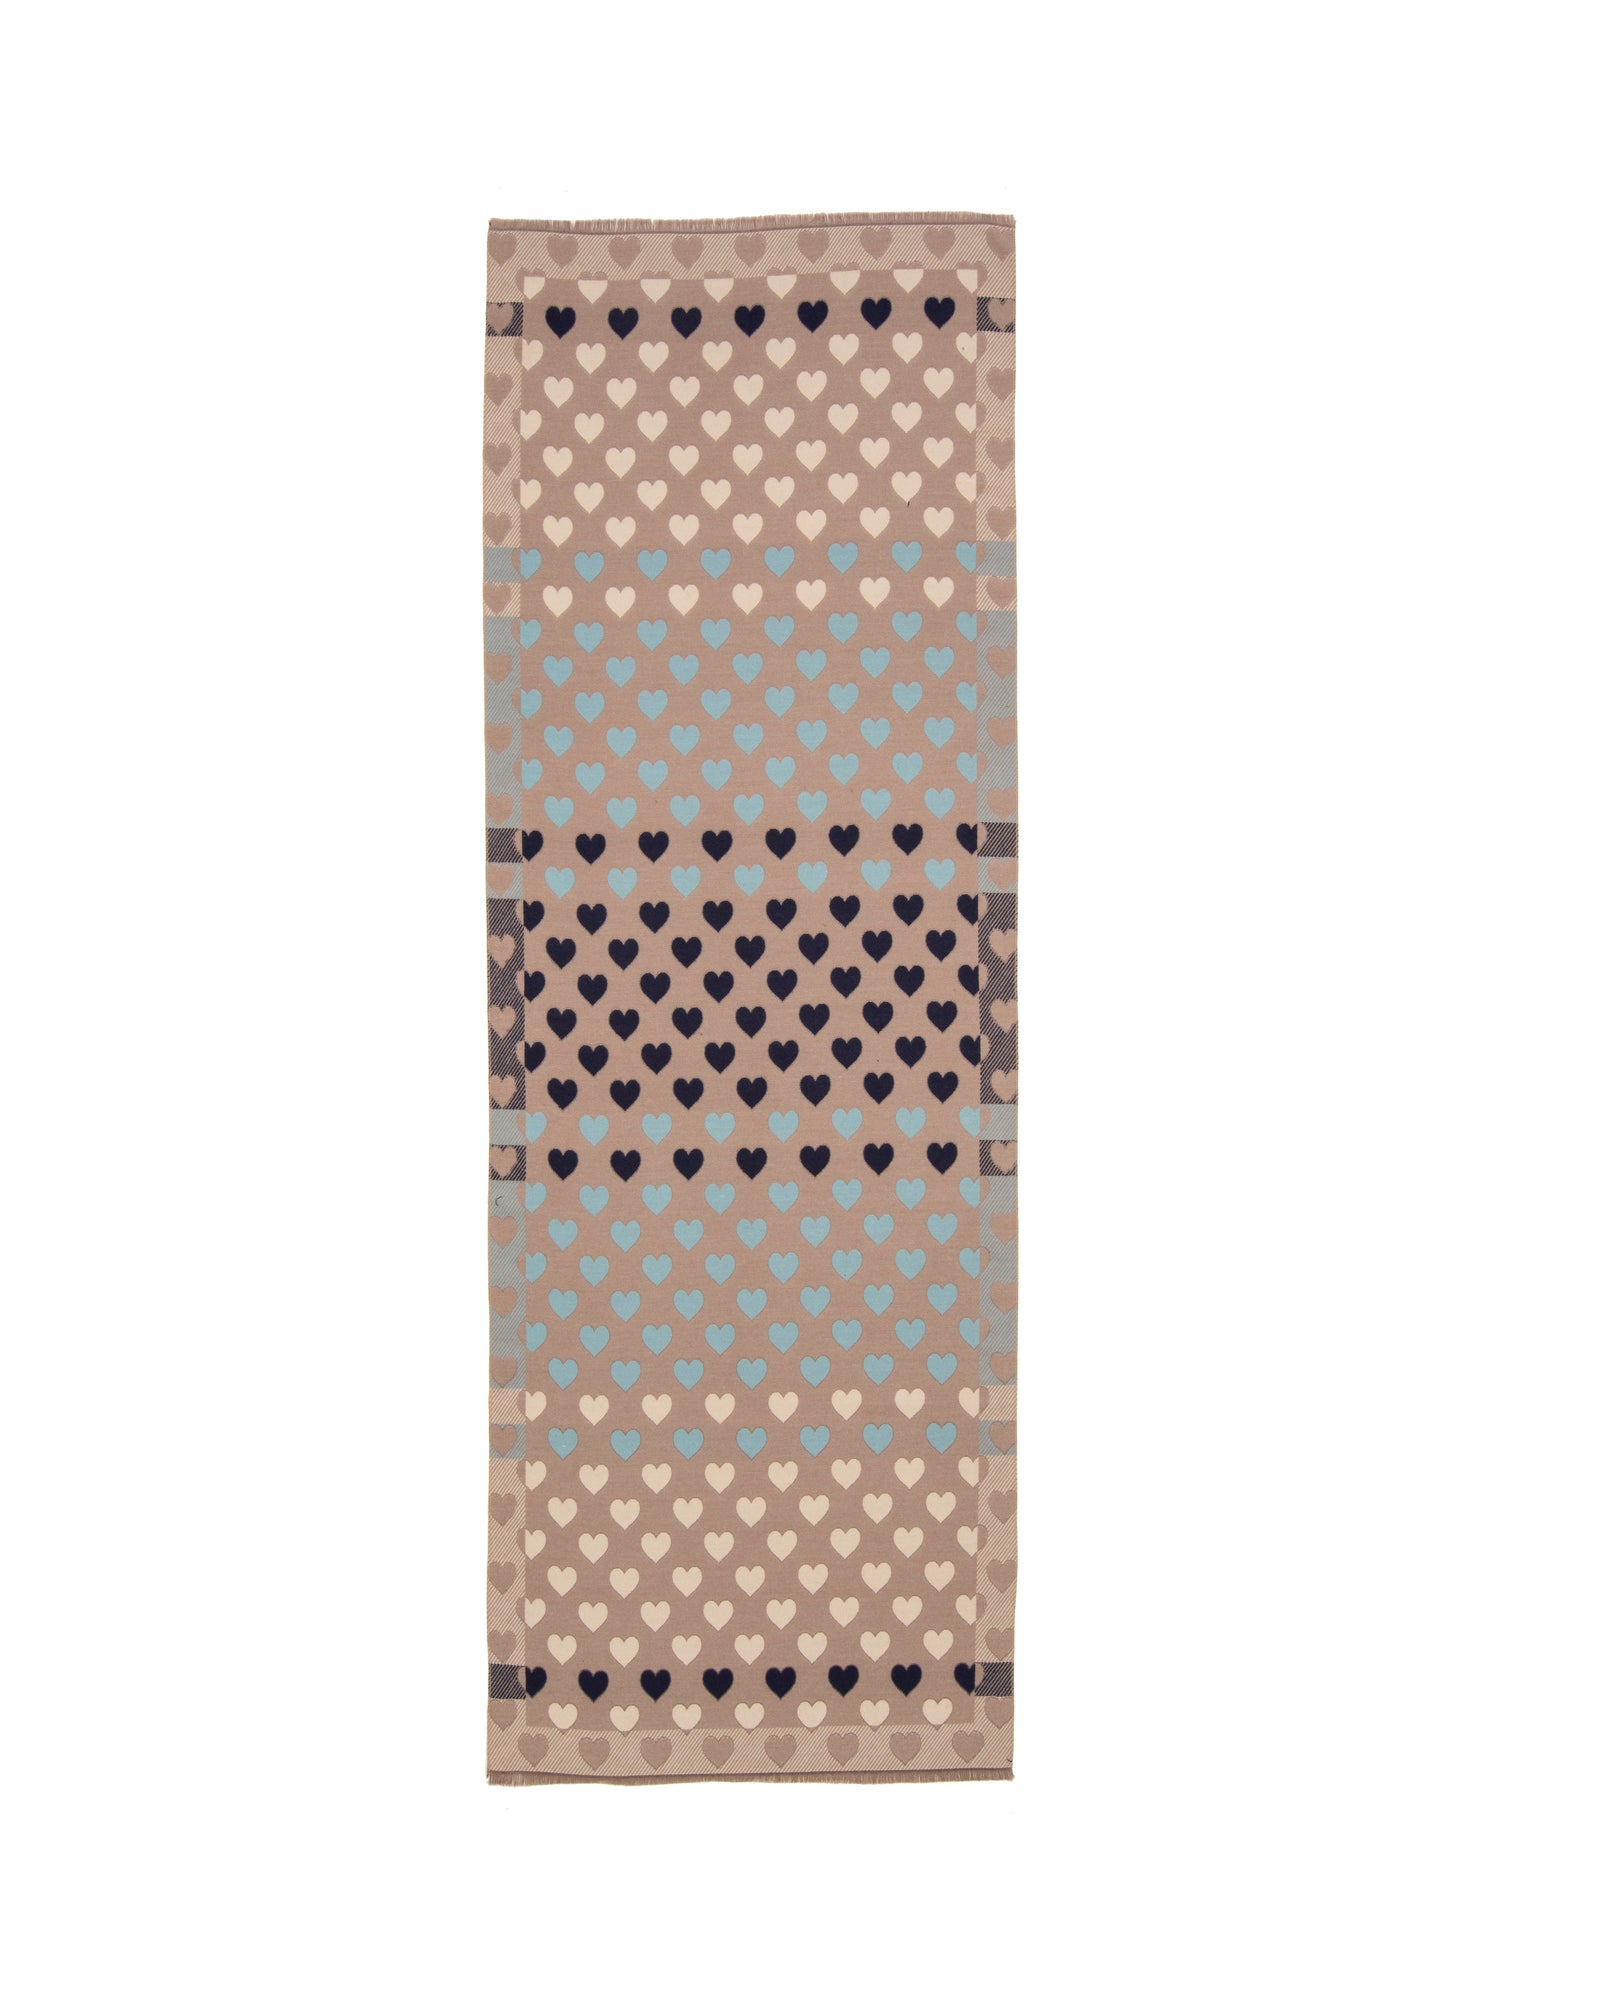 Hearts Scarf in Taupe